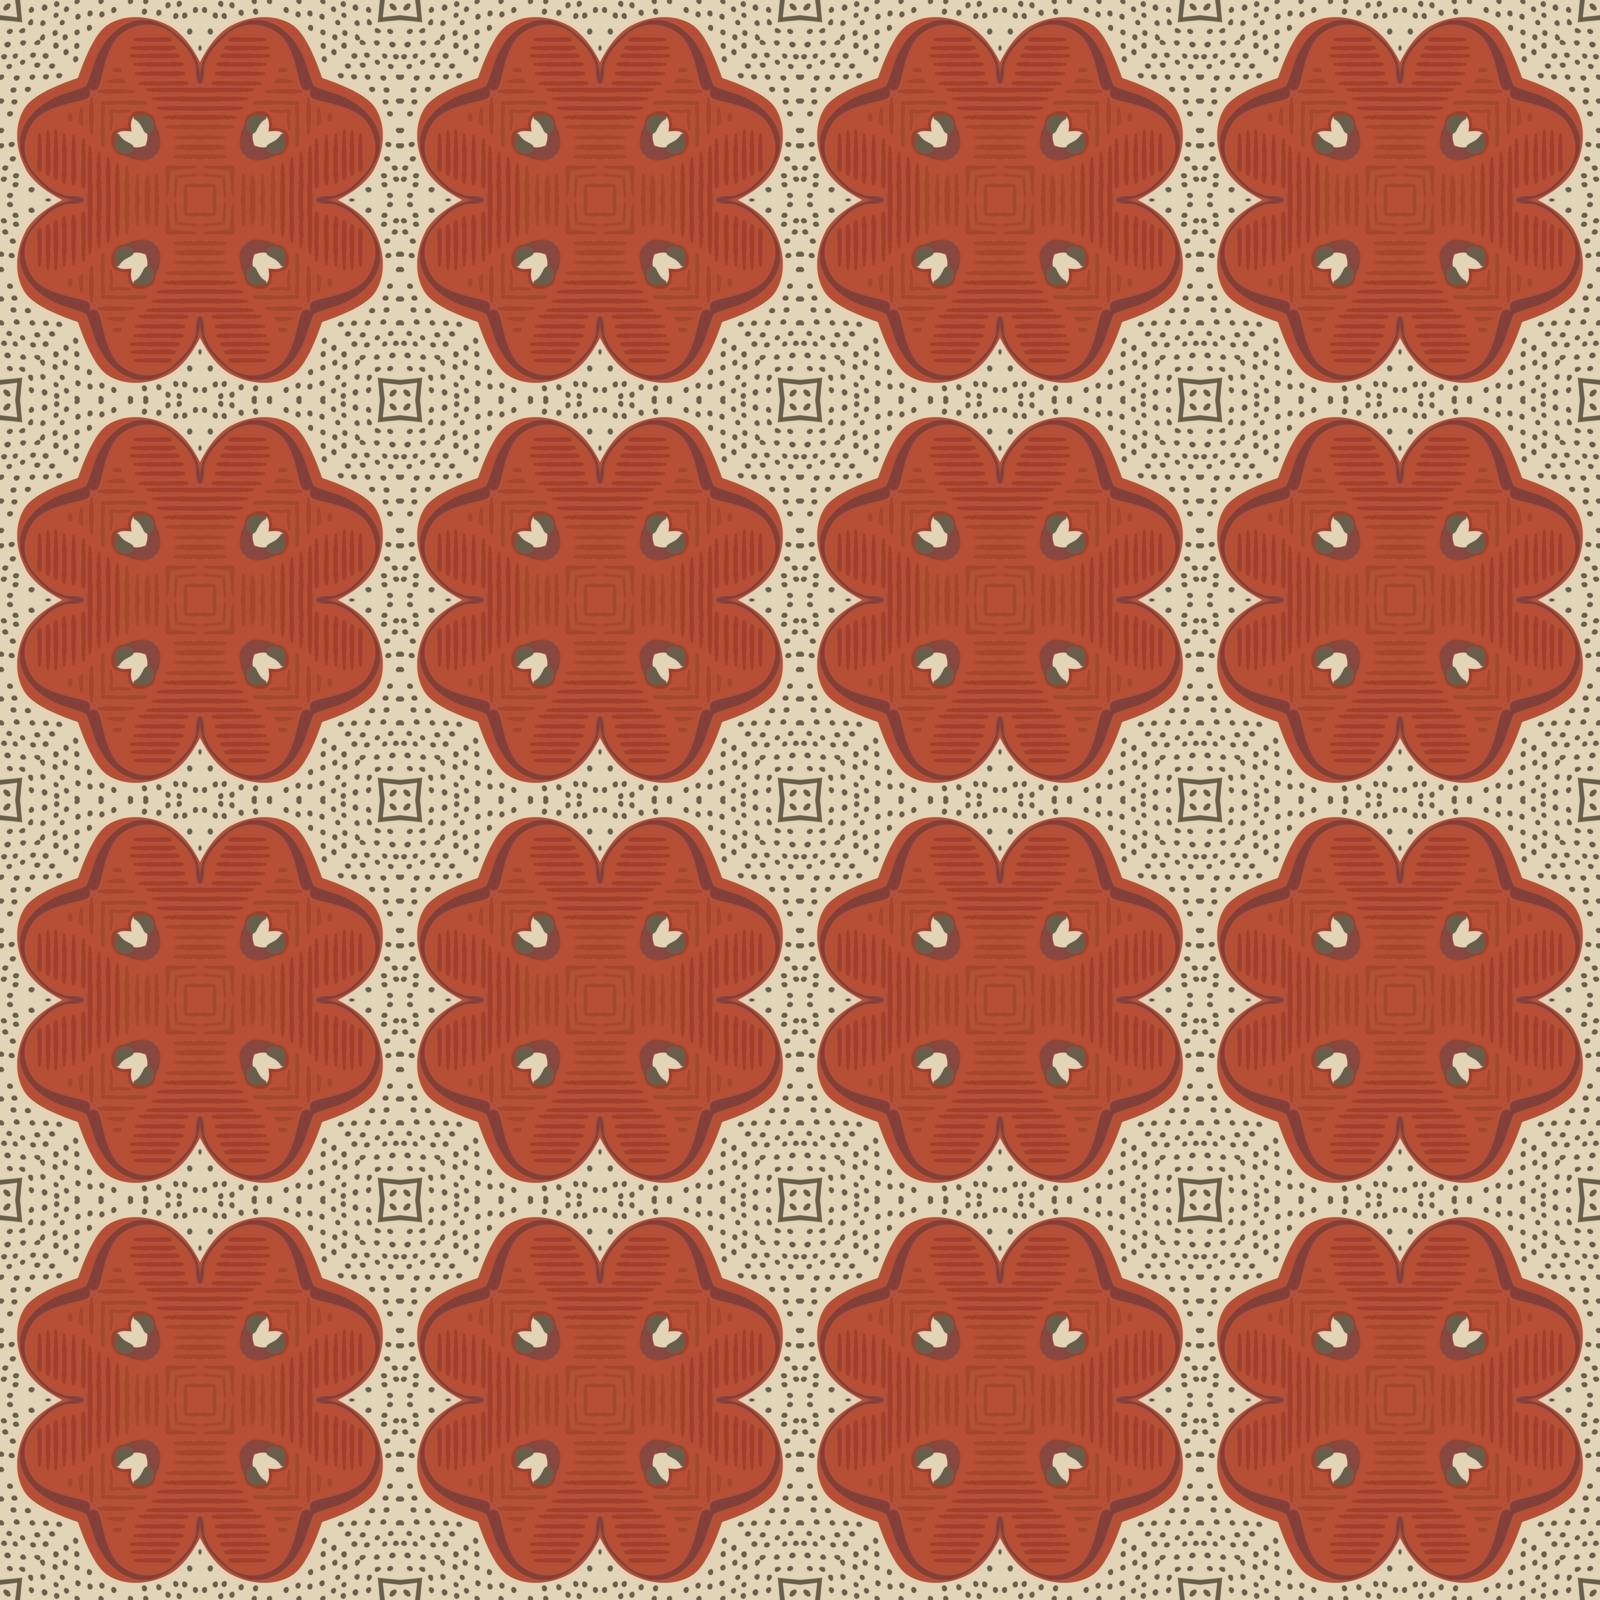 Seamless illustrated pattern made of abstract elements in beige, red and gray